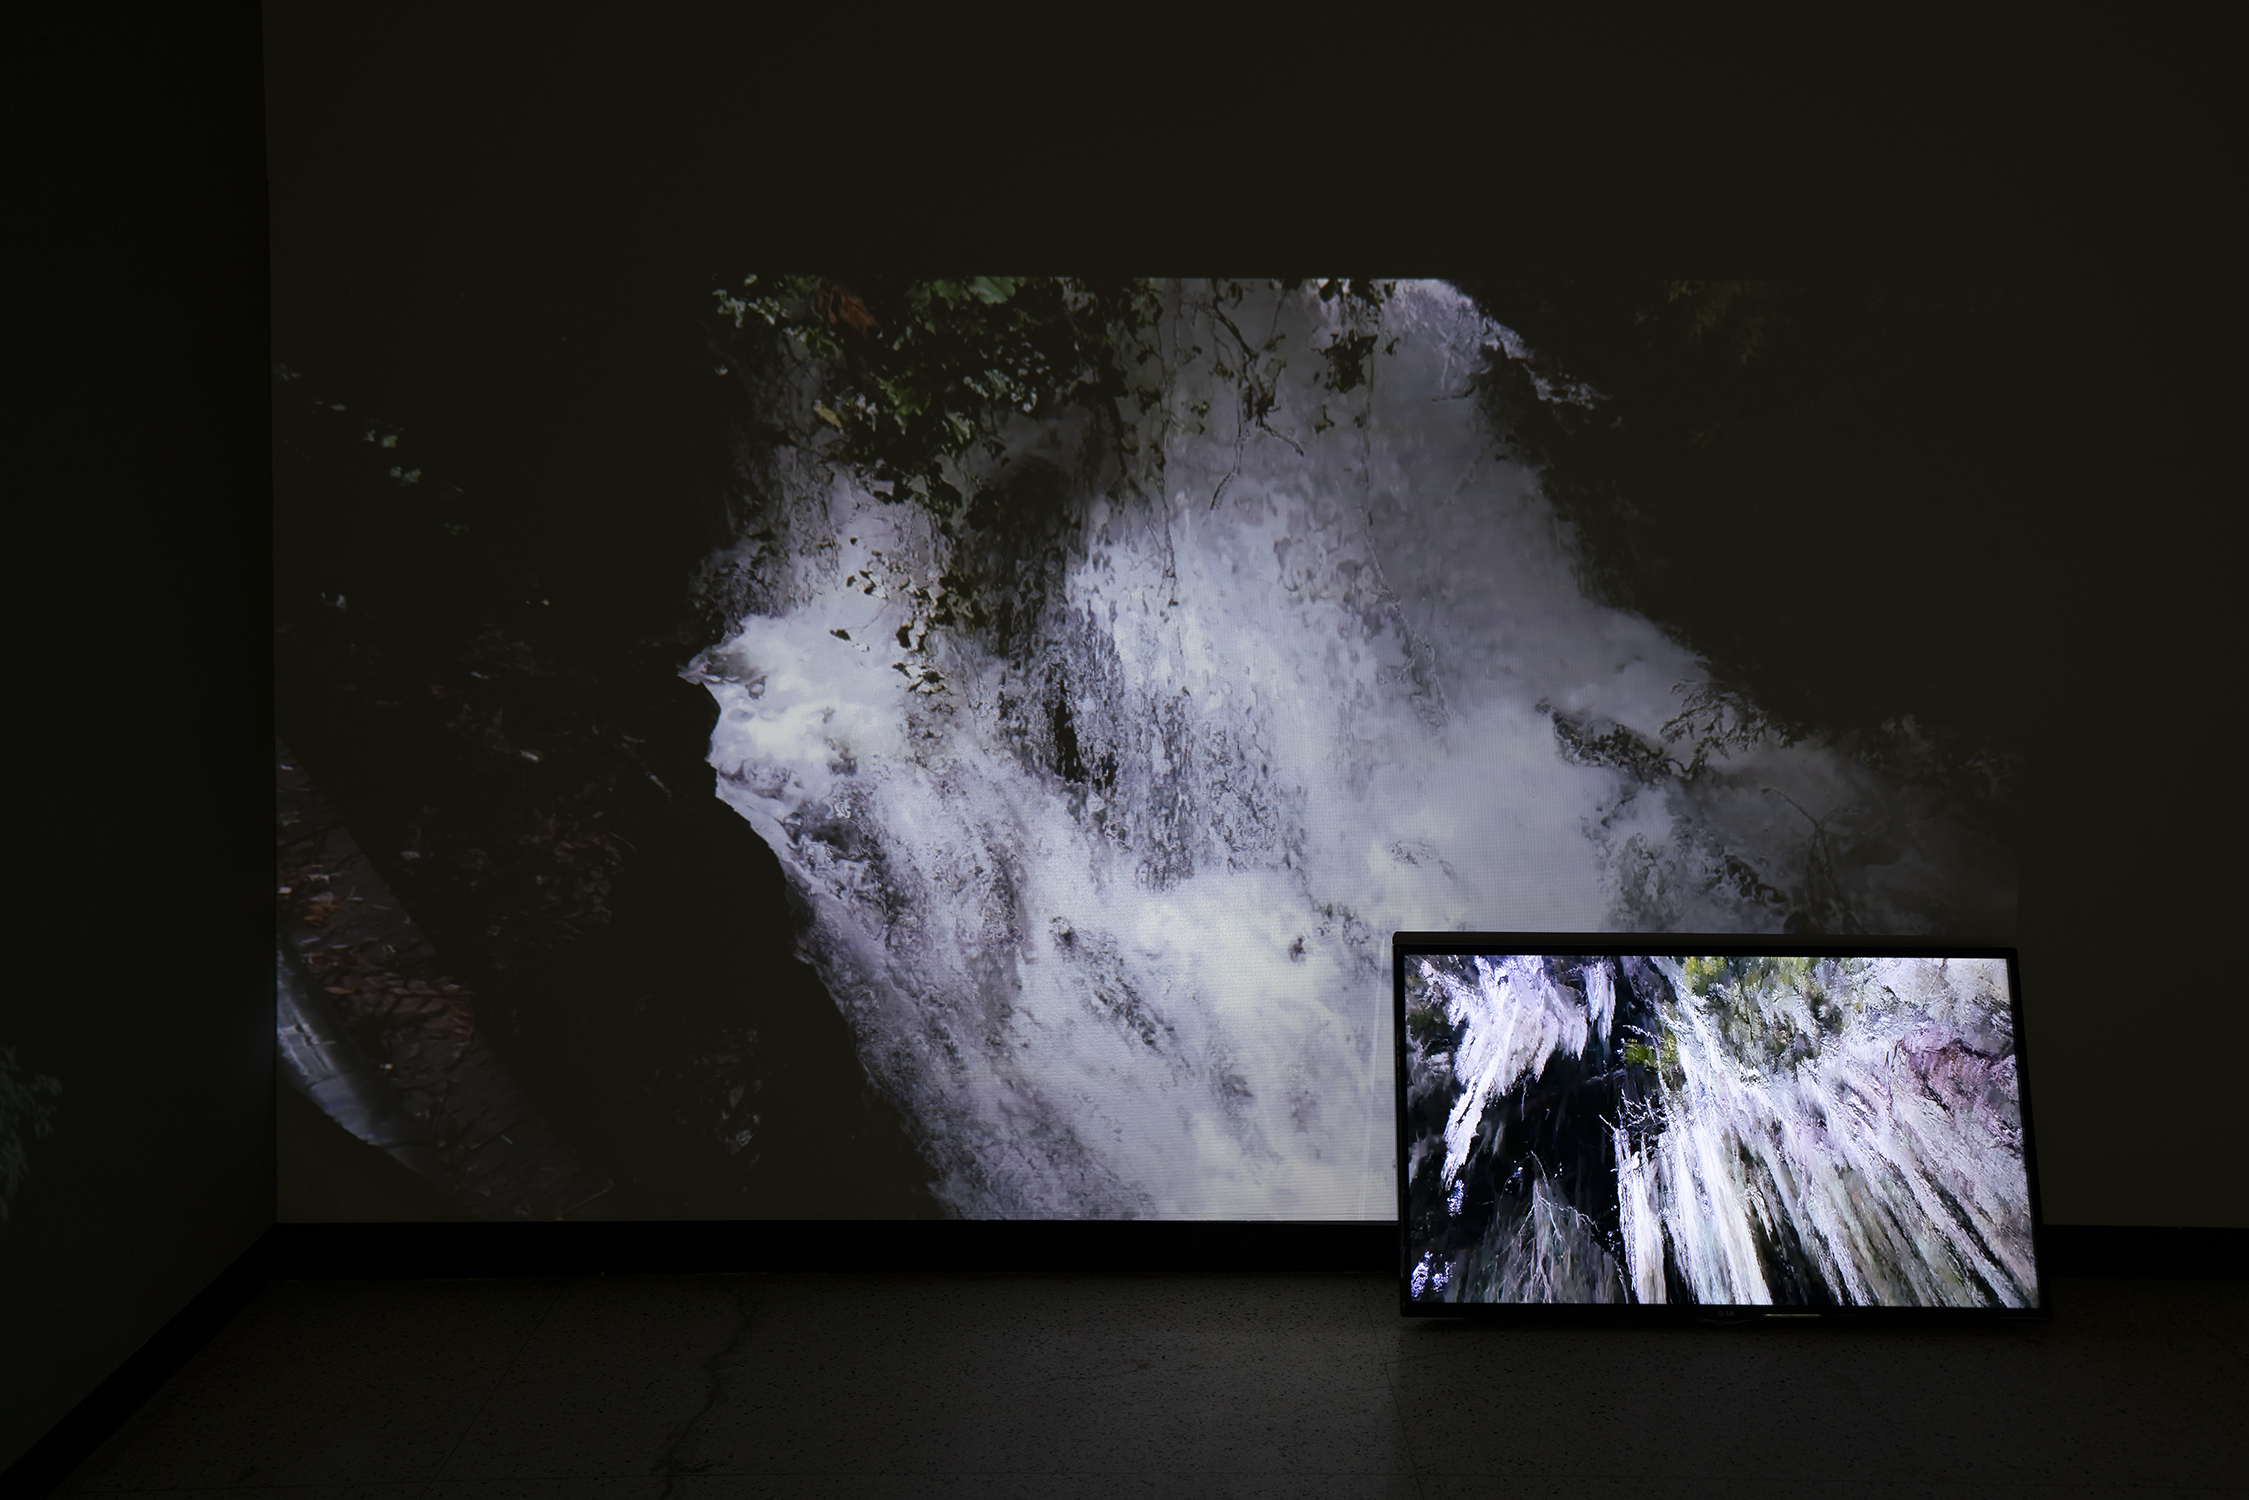 "Field Recordings" - 2 minute video projection and TV